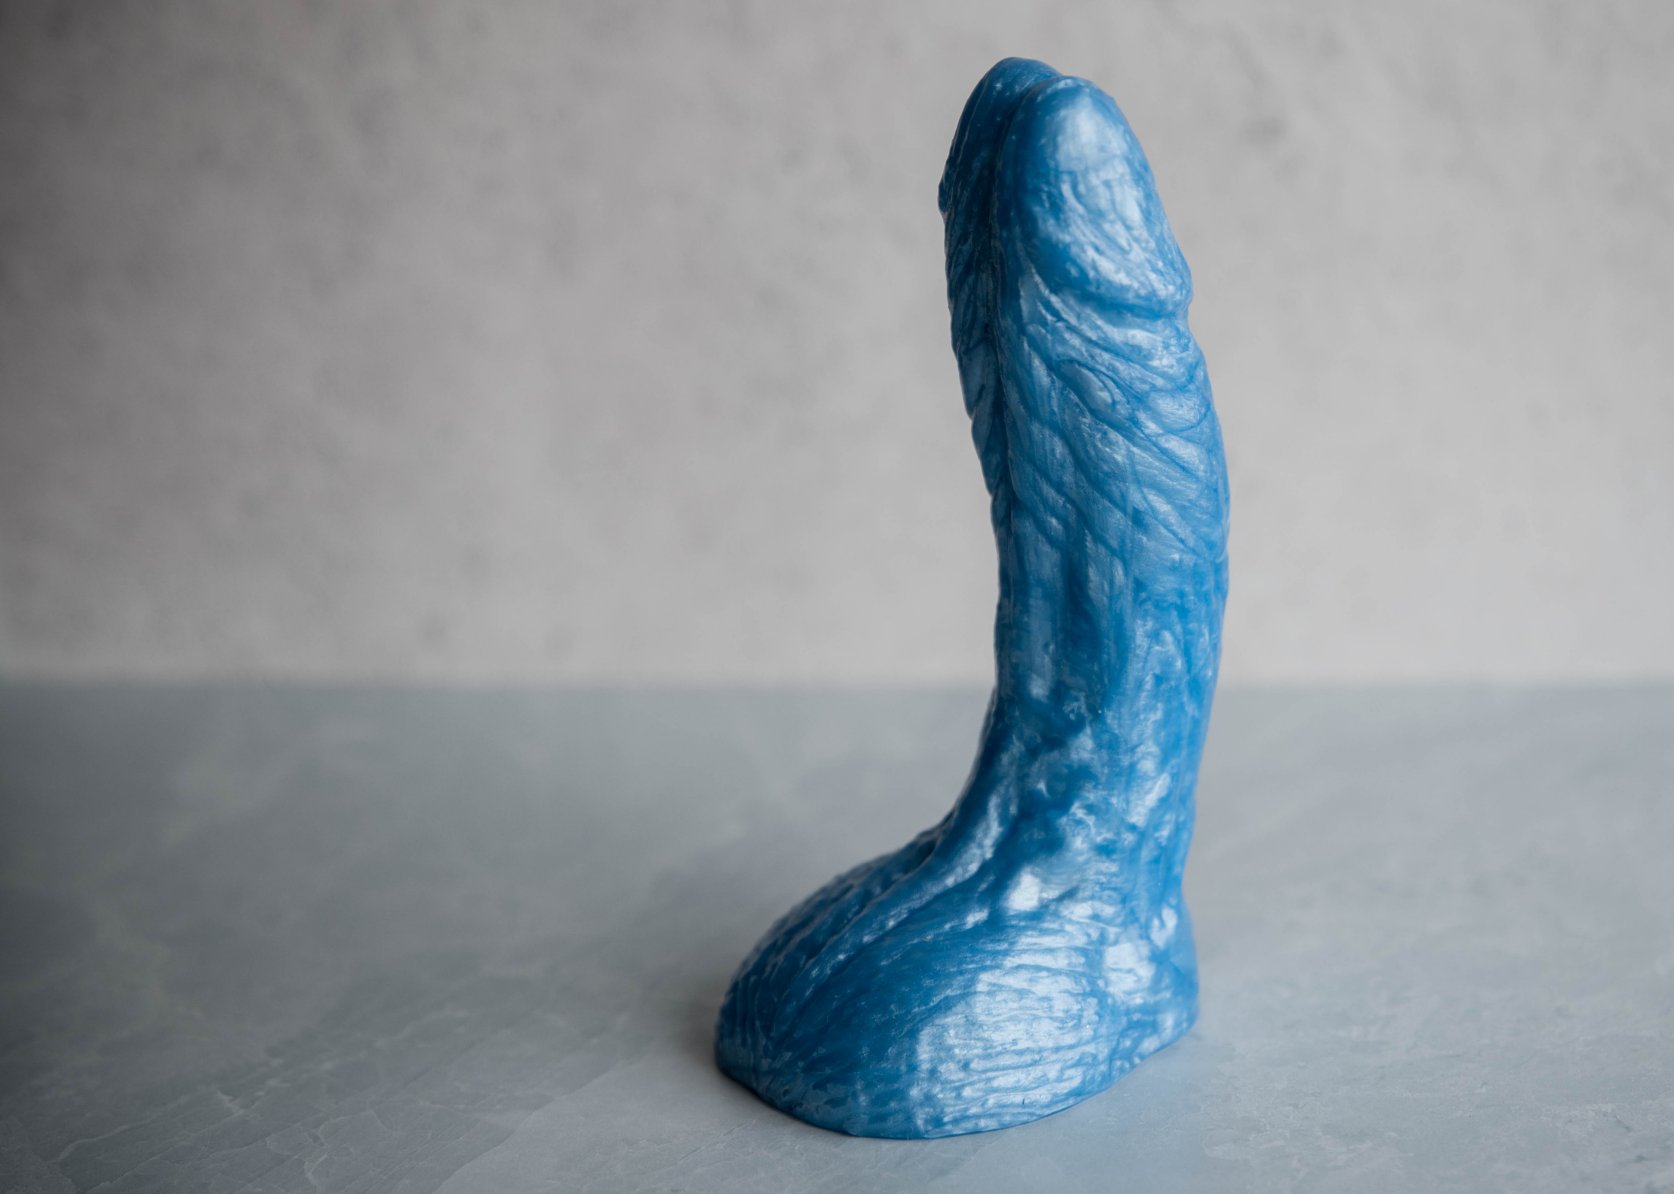 Fleshlight Alien Texture - Details, Reviews, Offers and more | FleshAssist